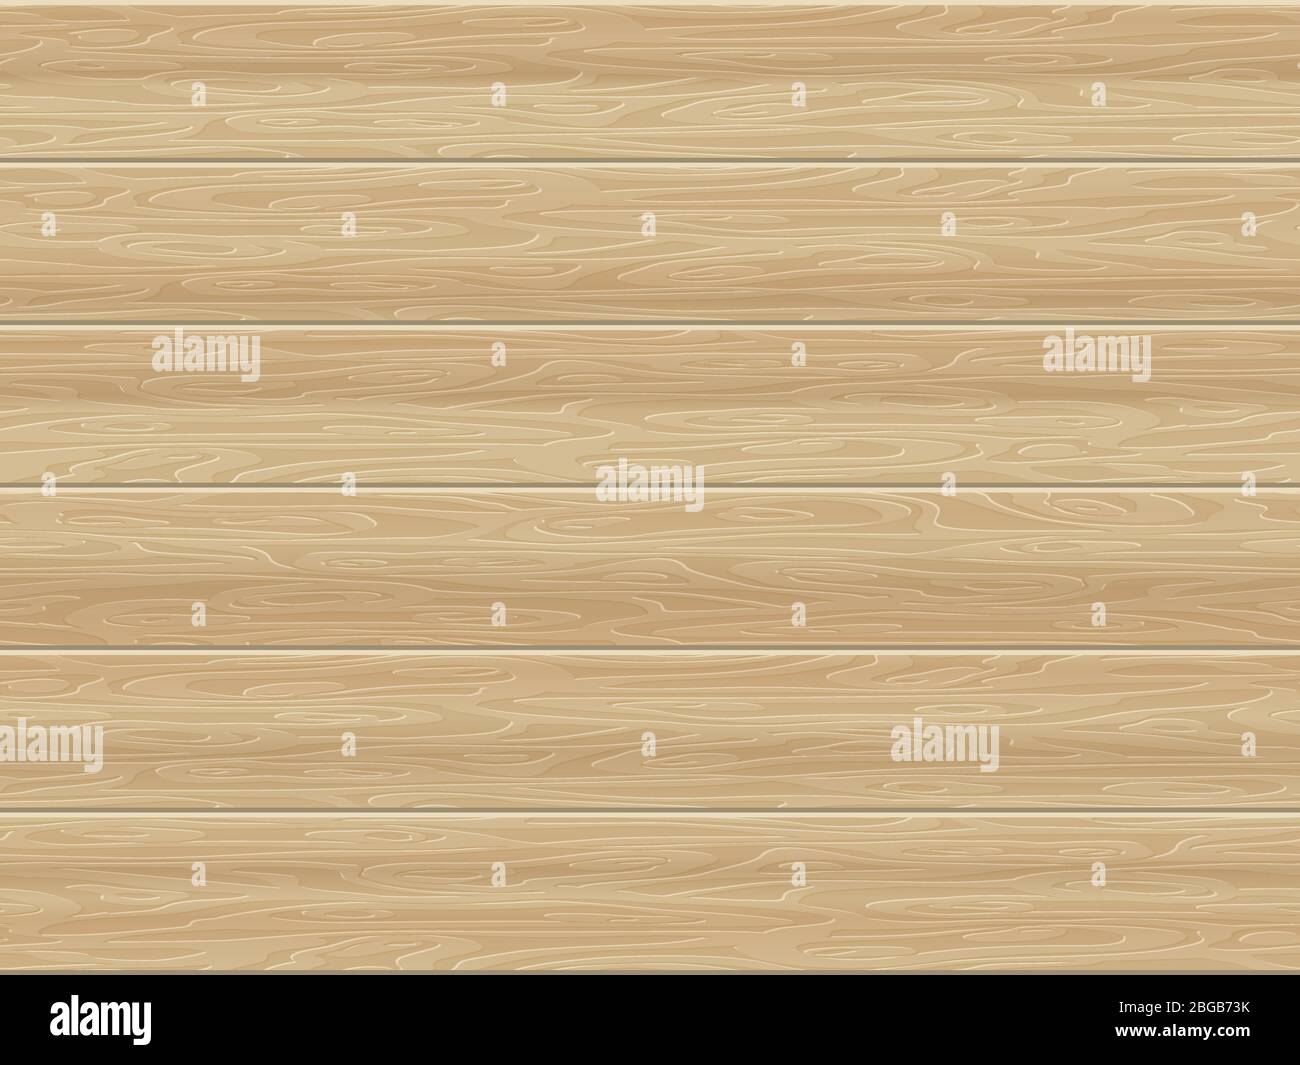 Seamless wooden board surface background. EPS 10 vector Stock Vector